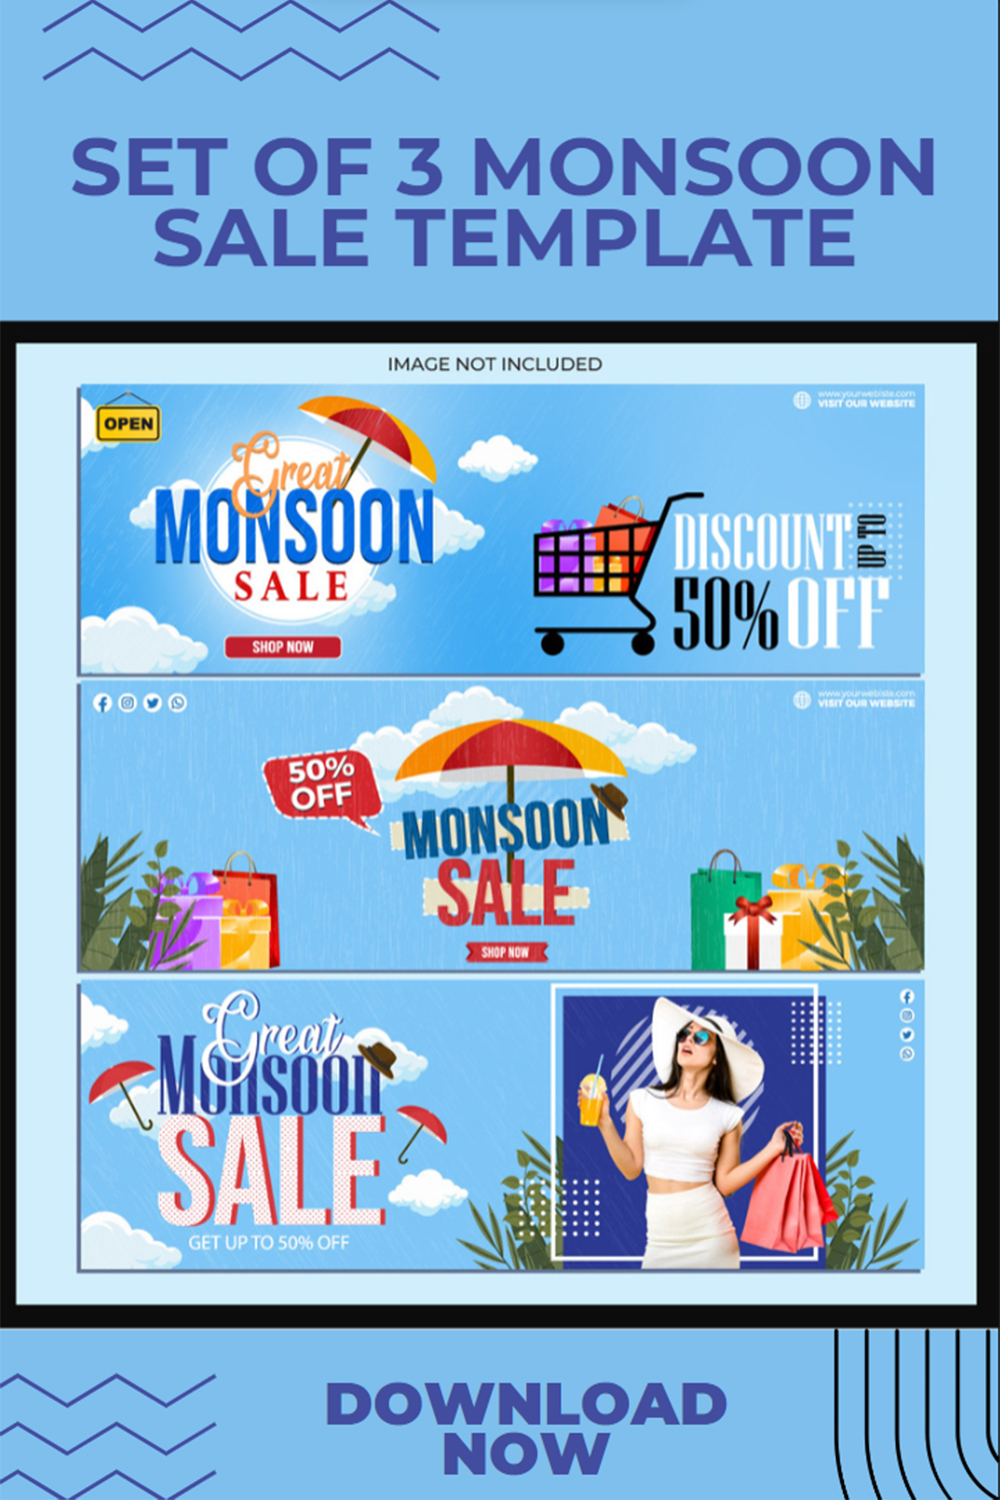 Umbrella and shopping bags for monsoon season sale Banner landing page web header template design pinterest preview image.